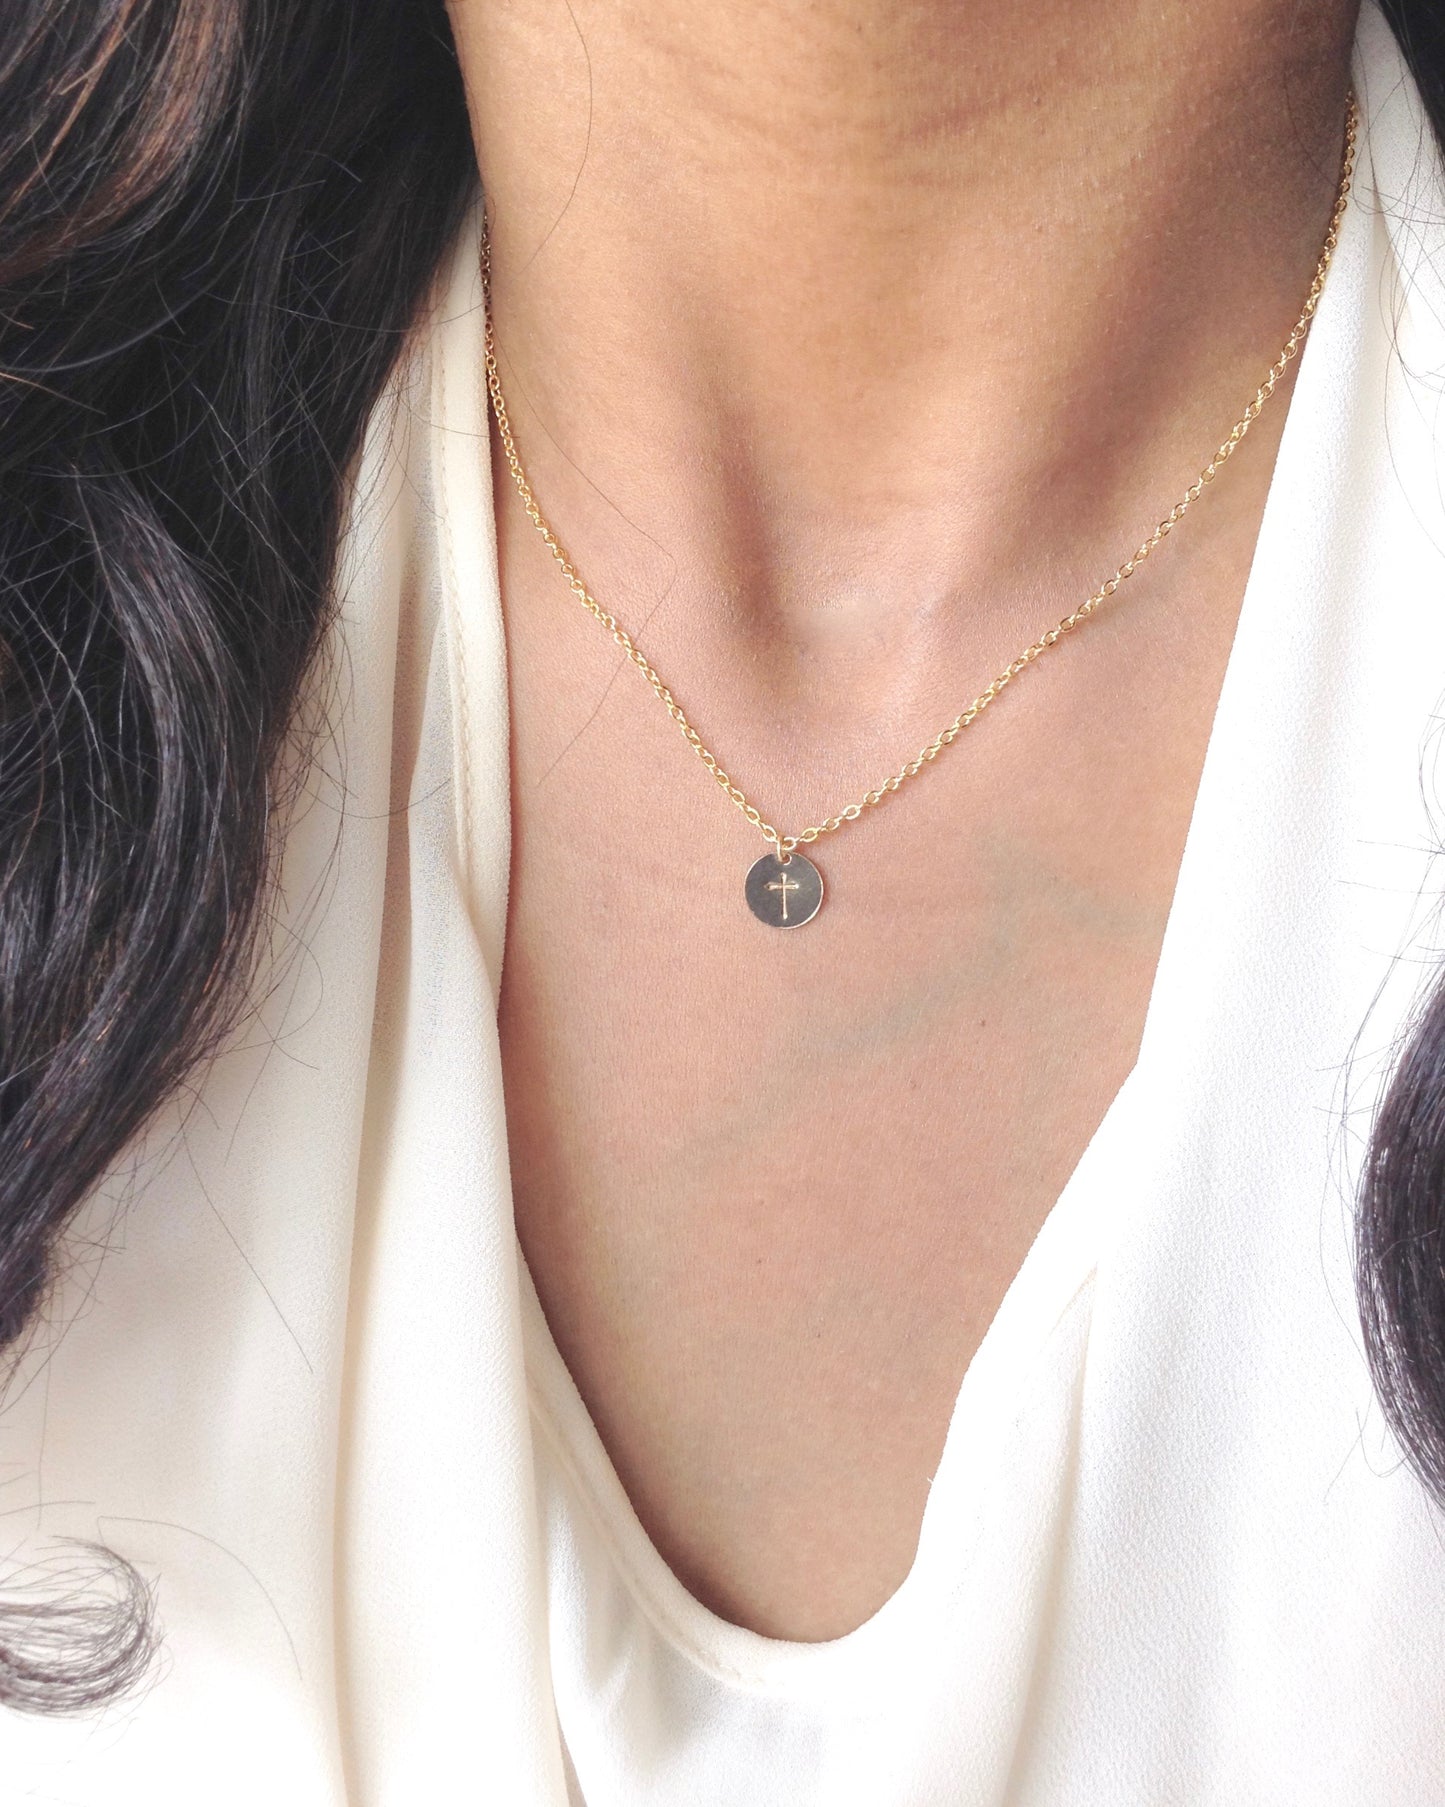 Tiny Simple Cross Necklace in Gold Filled or Sterling Silver | IB Jewelry